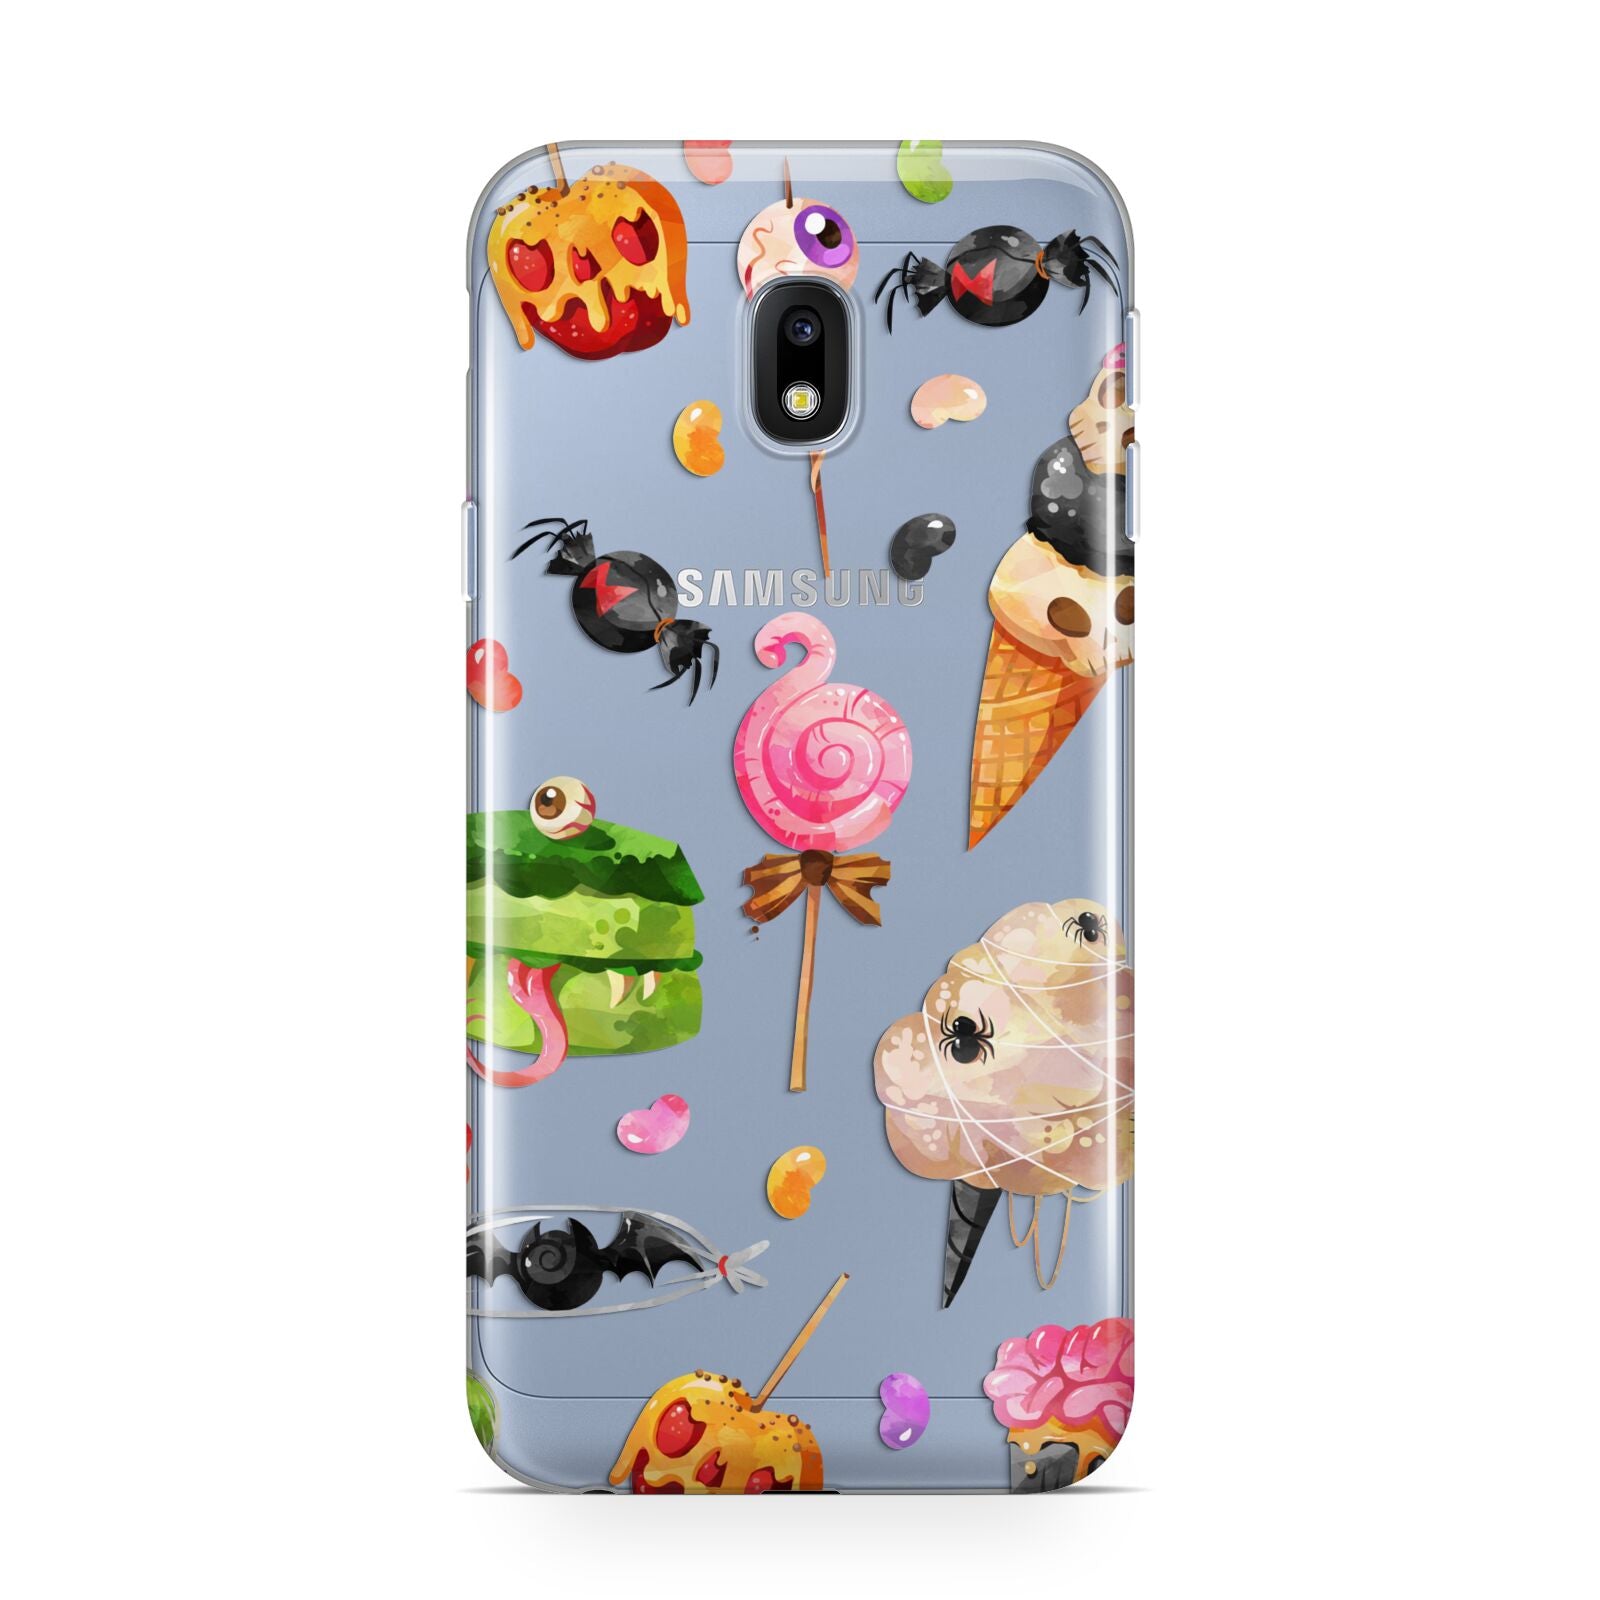 Halloween Cakes and Candy Samsung Galaxy J3 2017 Case